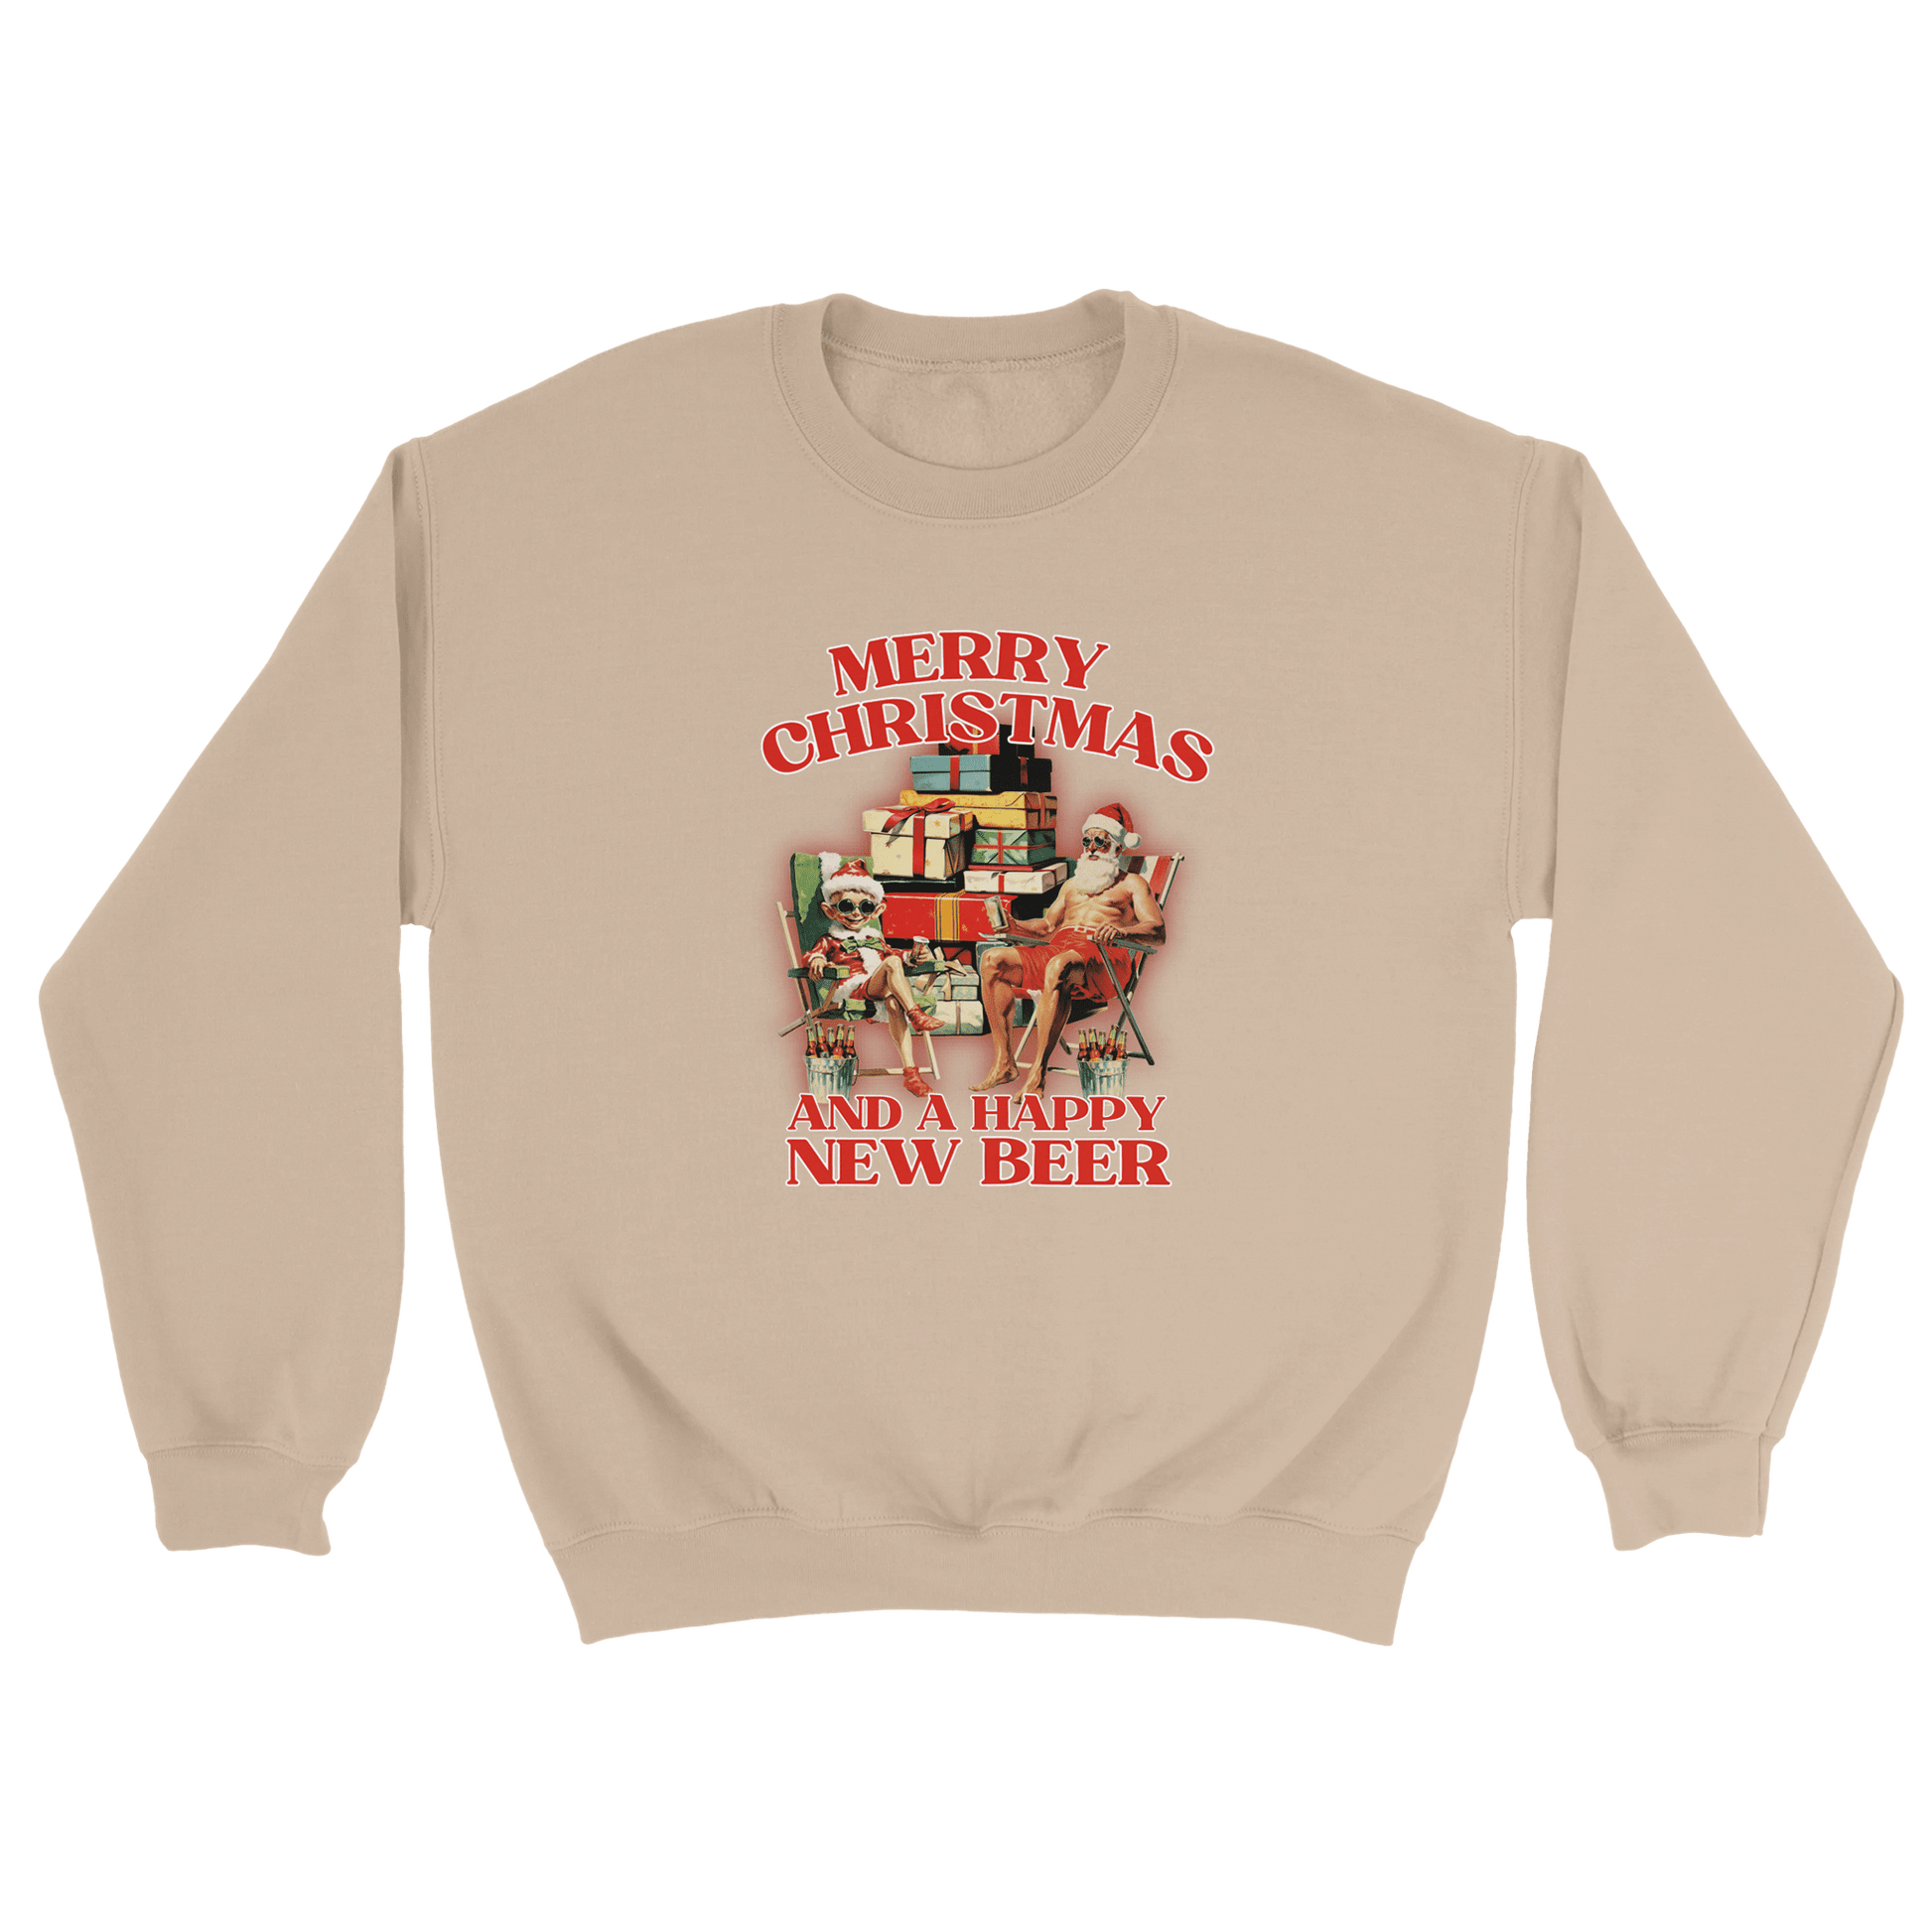 Merry Christmas and a Happy New Beer - Sweatshirt Sand